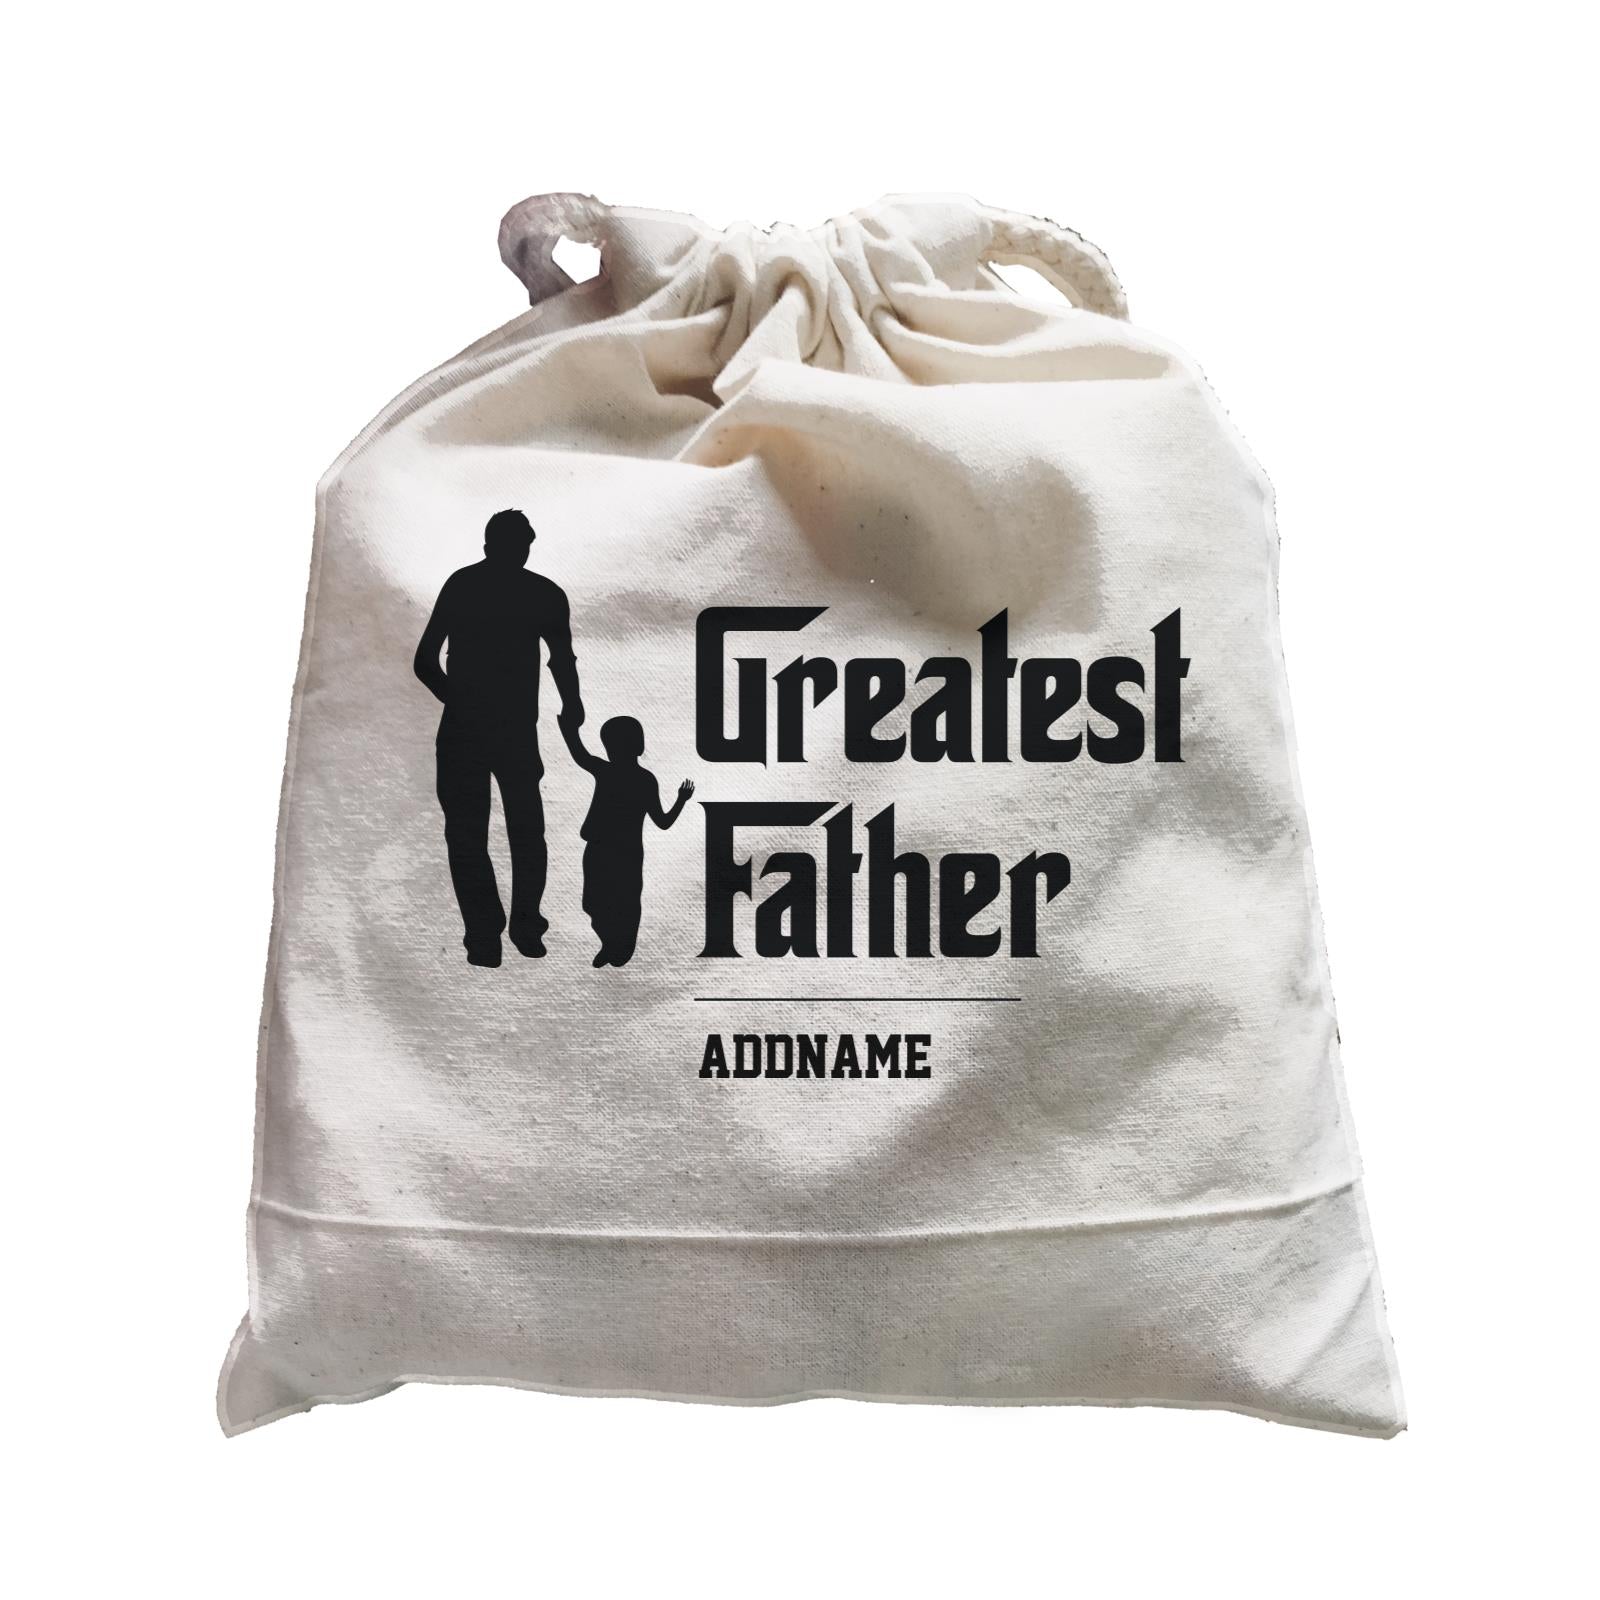 Father & Son Image Greatest Father Addname Satchel